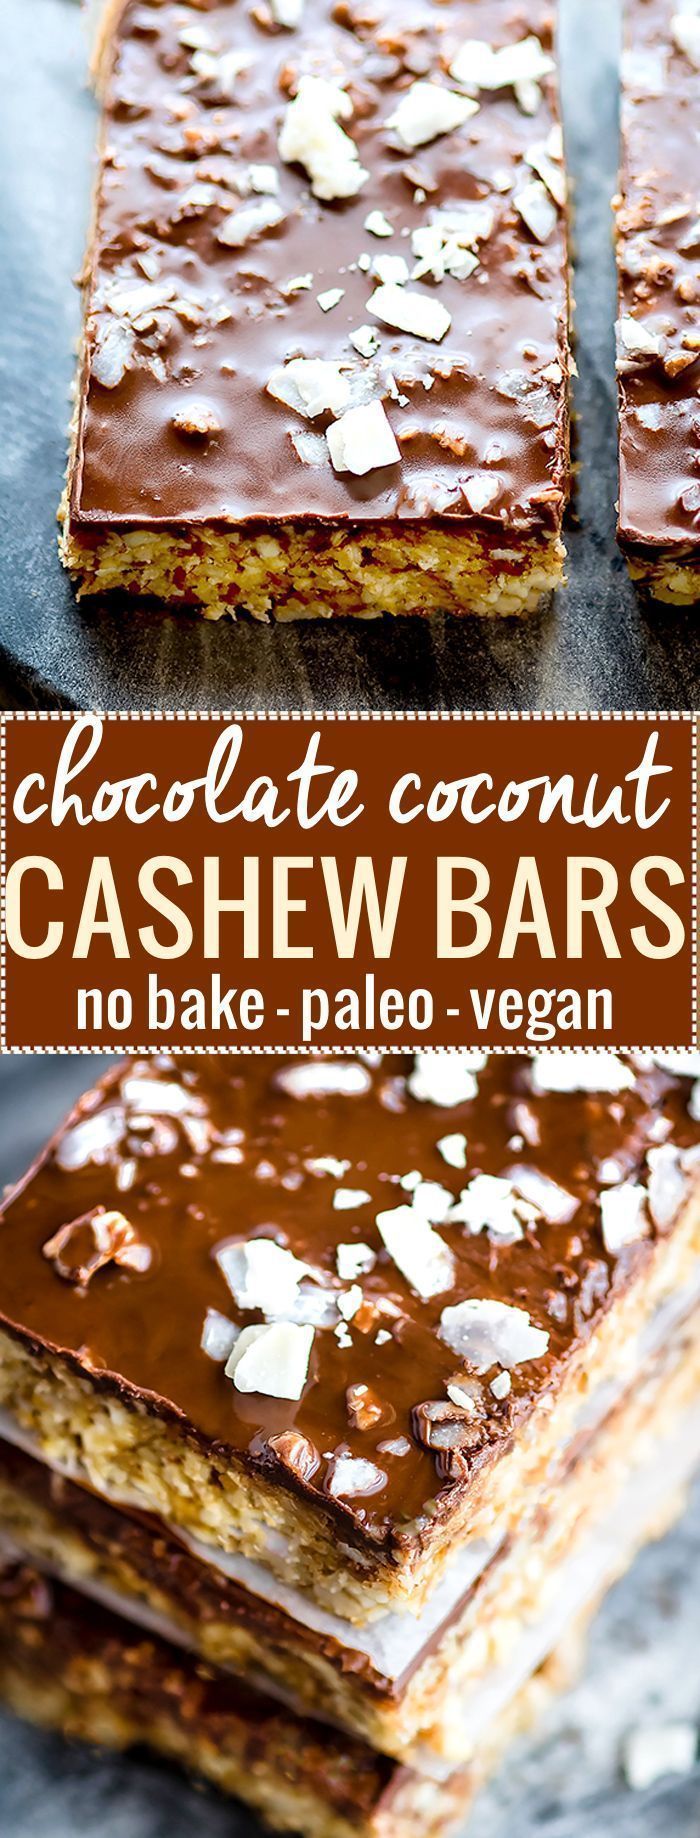 No bake Chocolate Coconut Cashew Bars made in 3 easy steps! These no bake chocolat